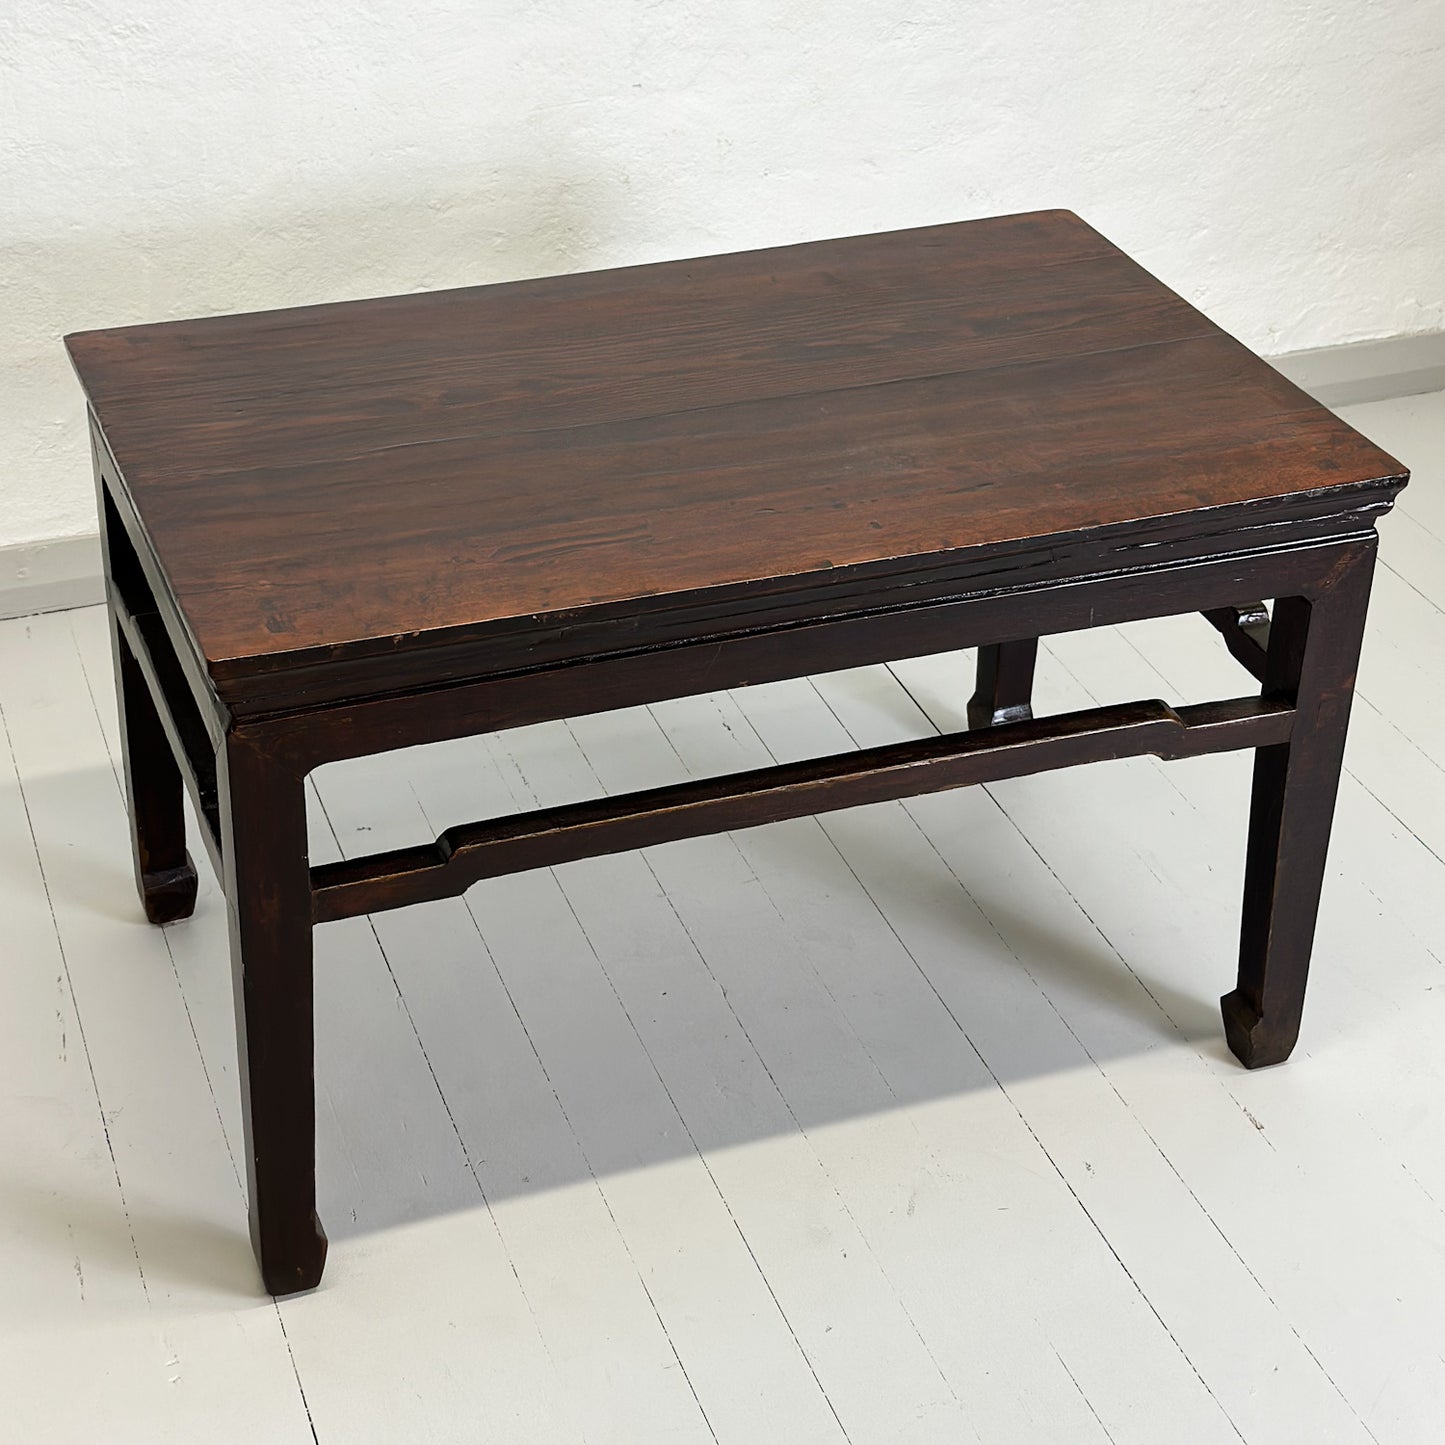 Vintage Timber Coffee Table